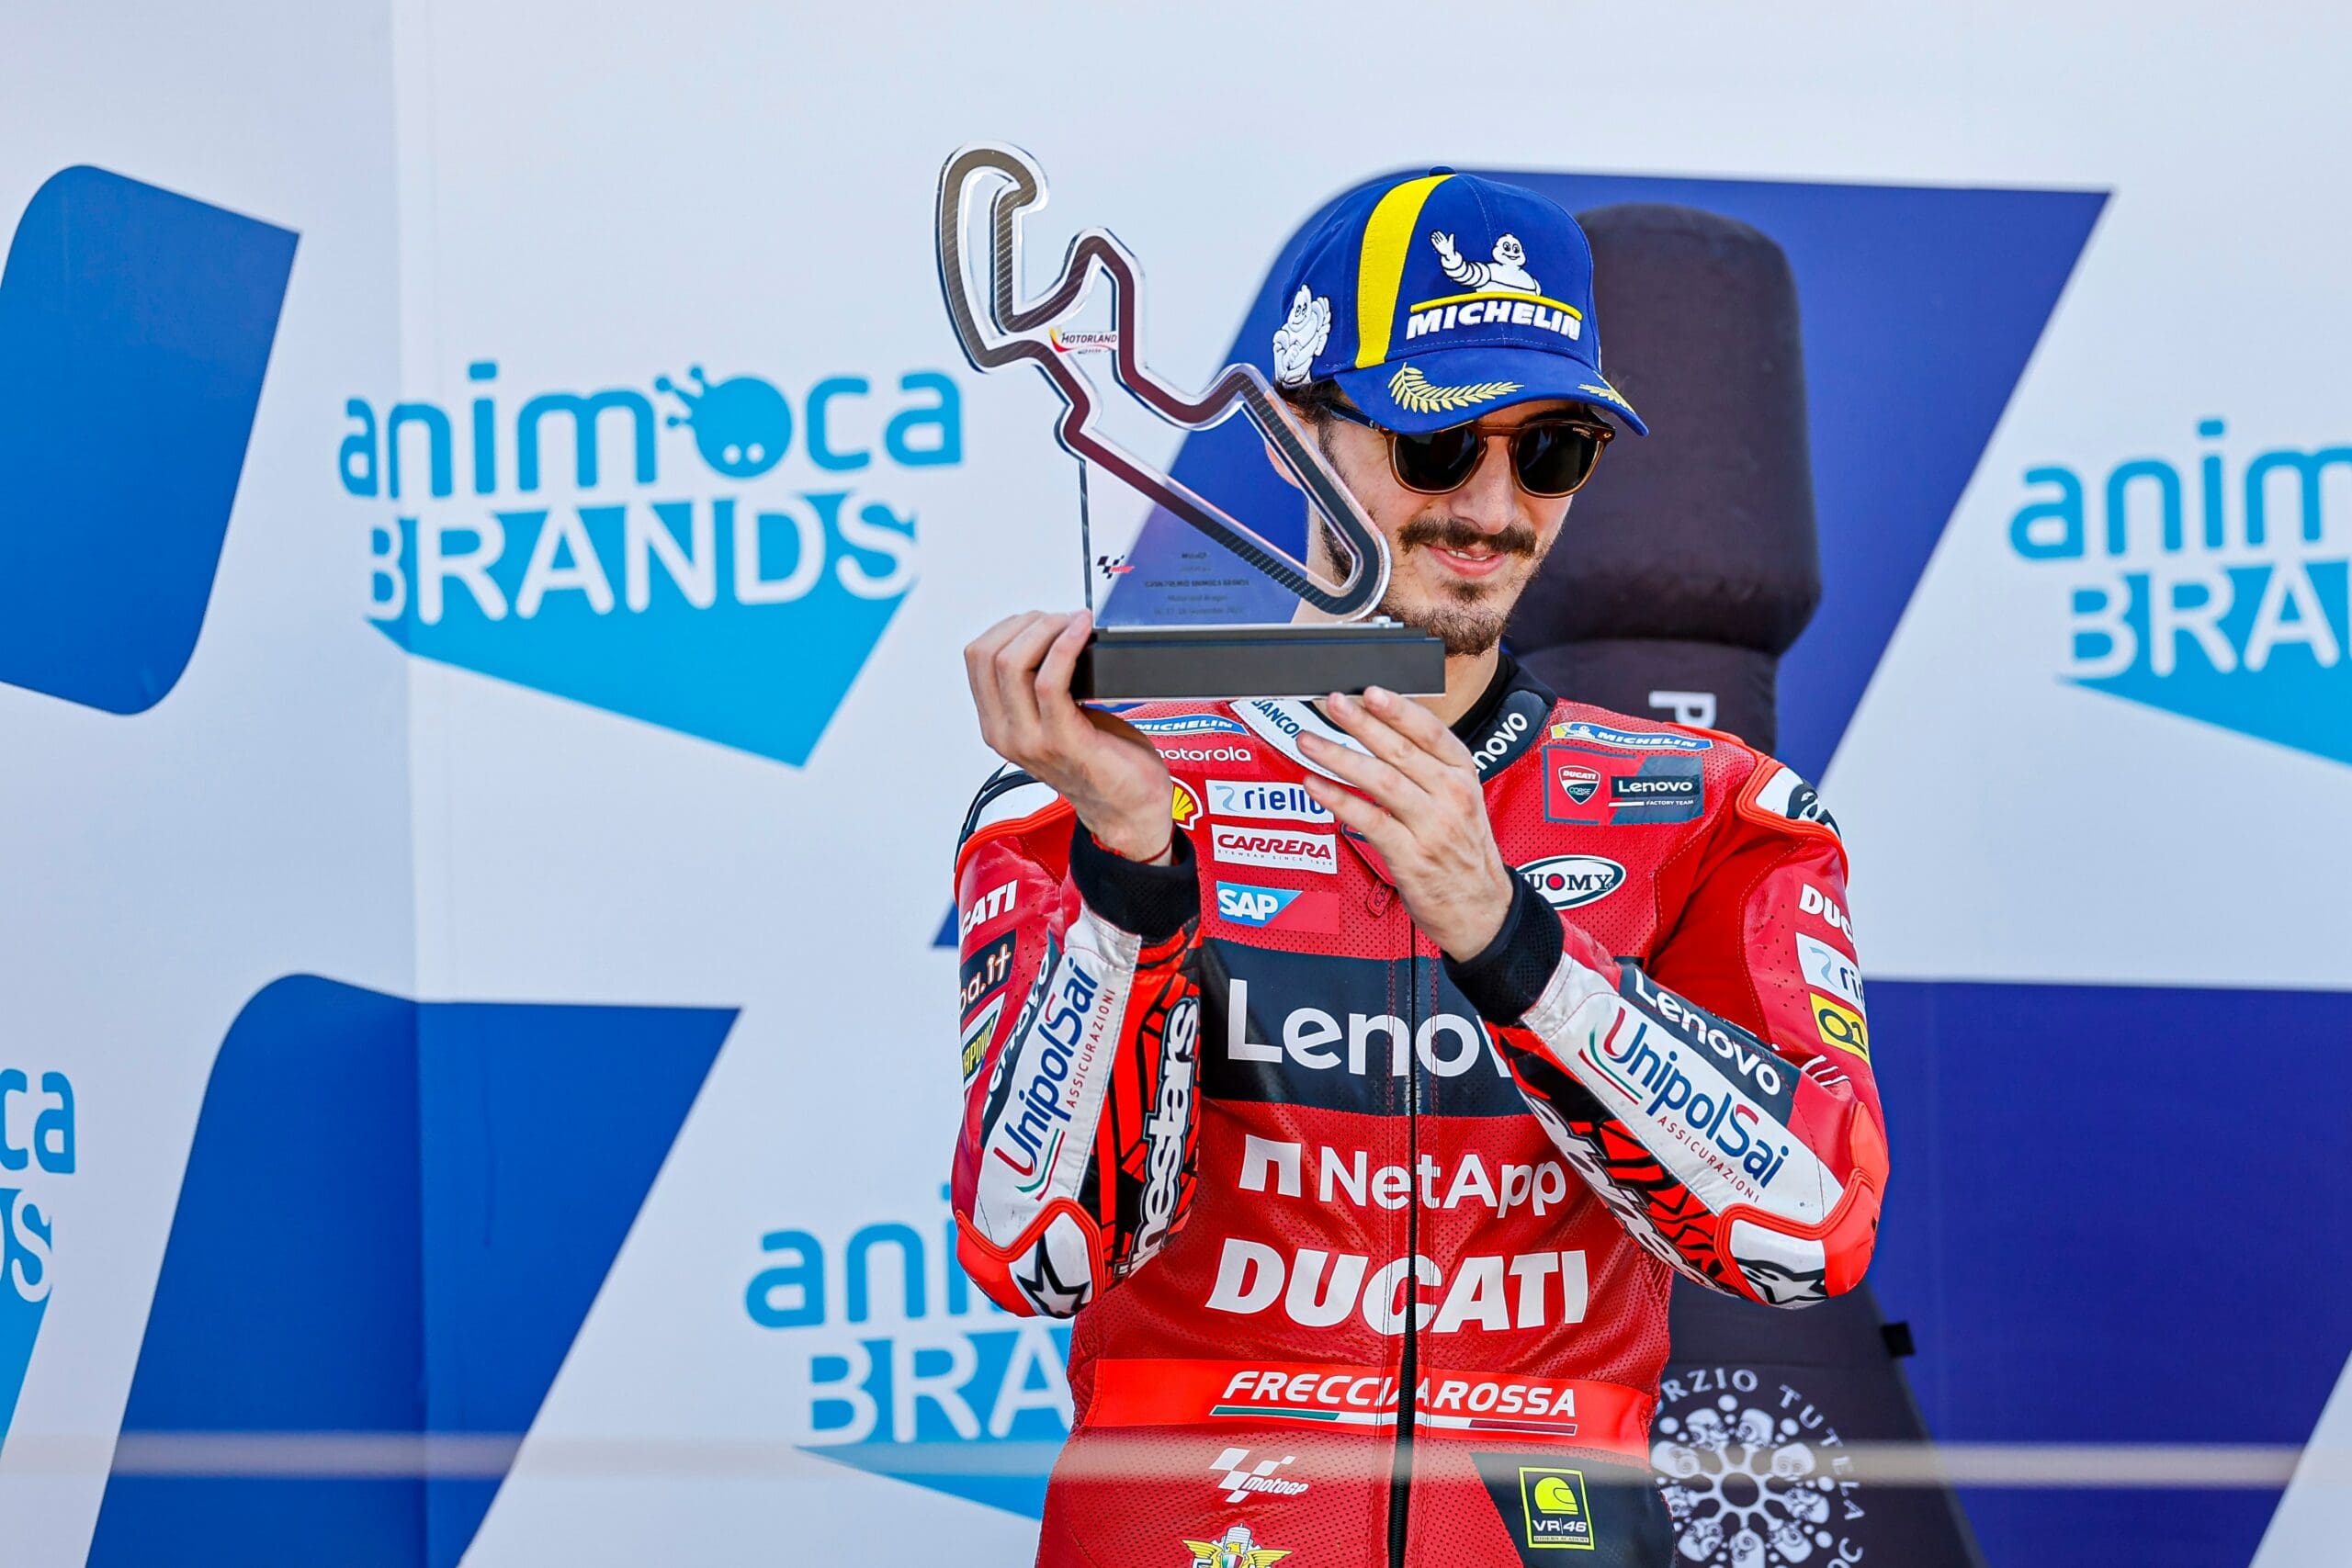 Ducati wins the third consecutive constructors' championship with five races to go.  Media taken from relevant Ducati press release. 